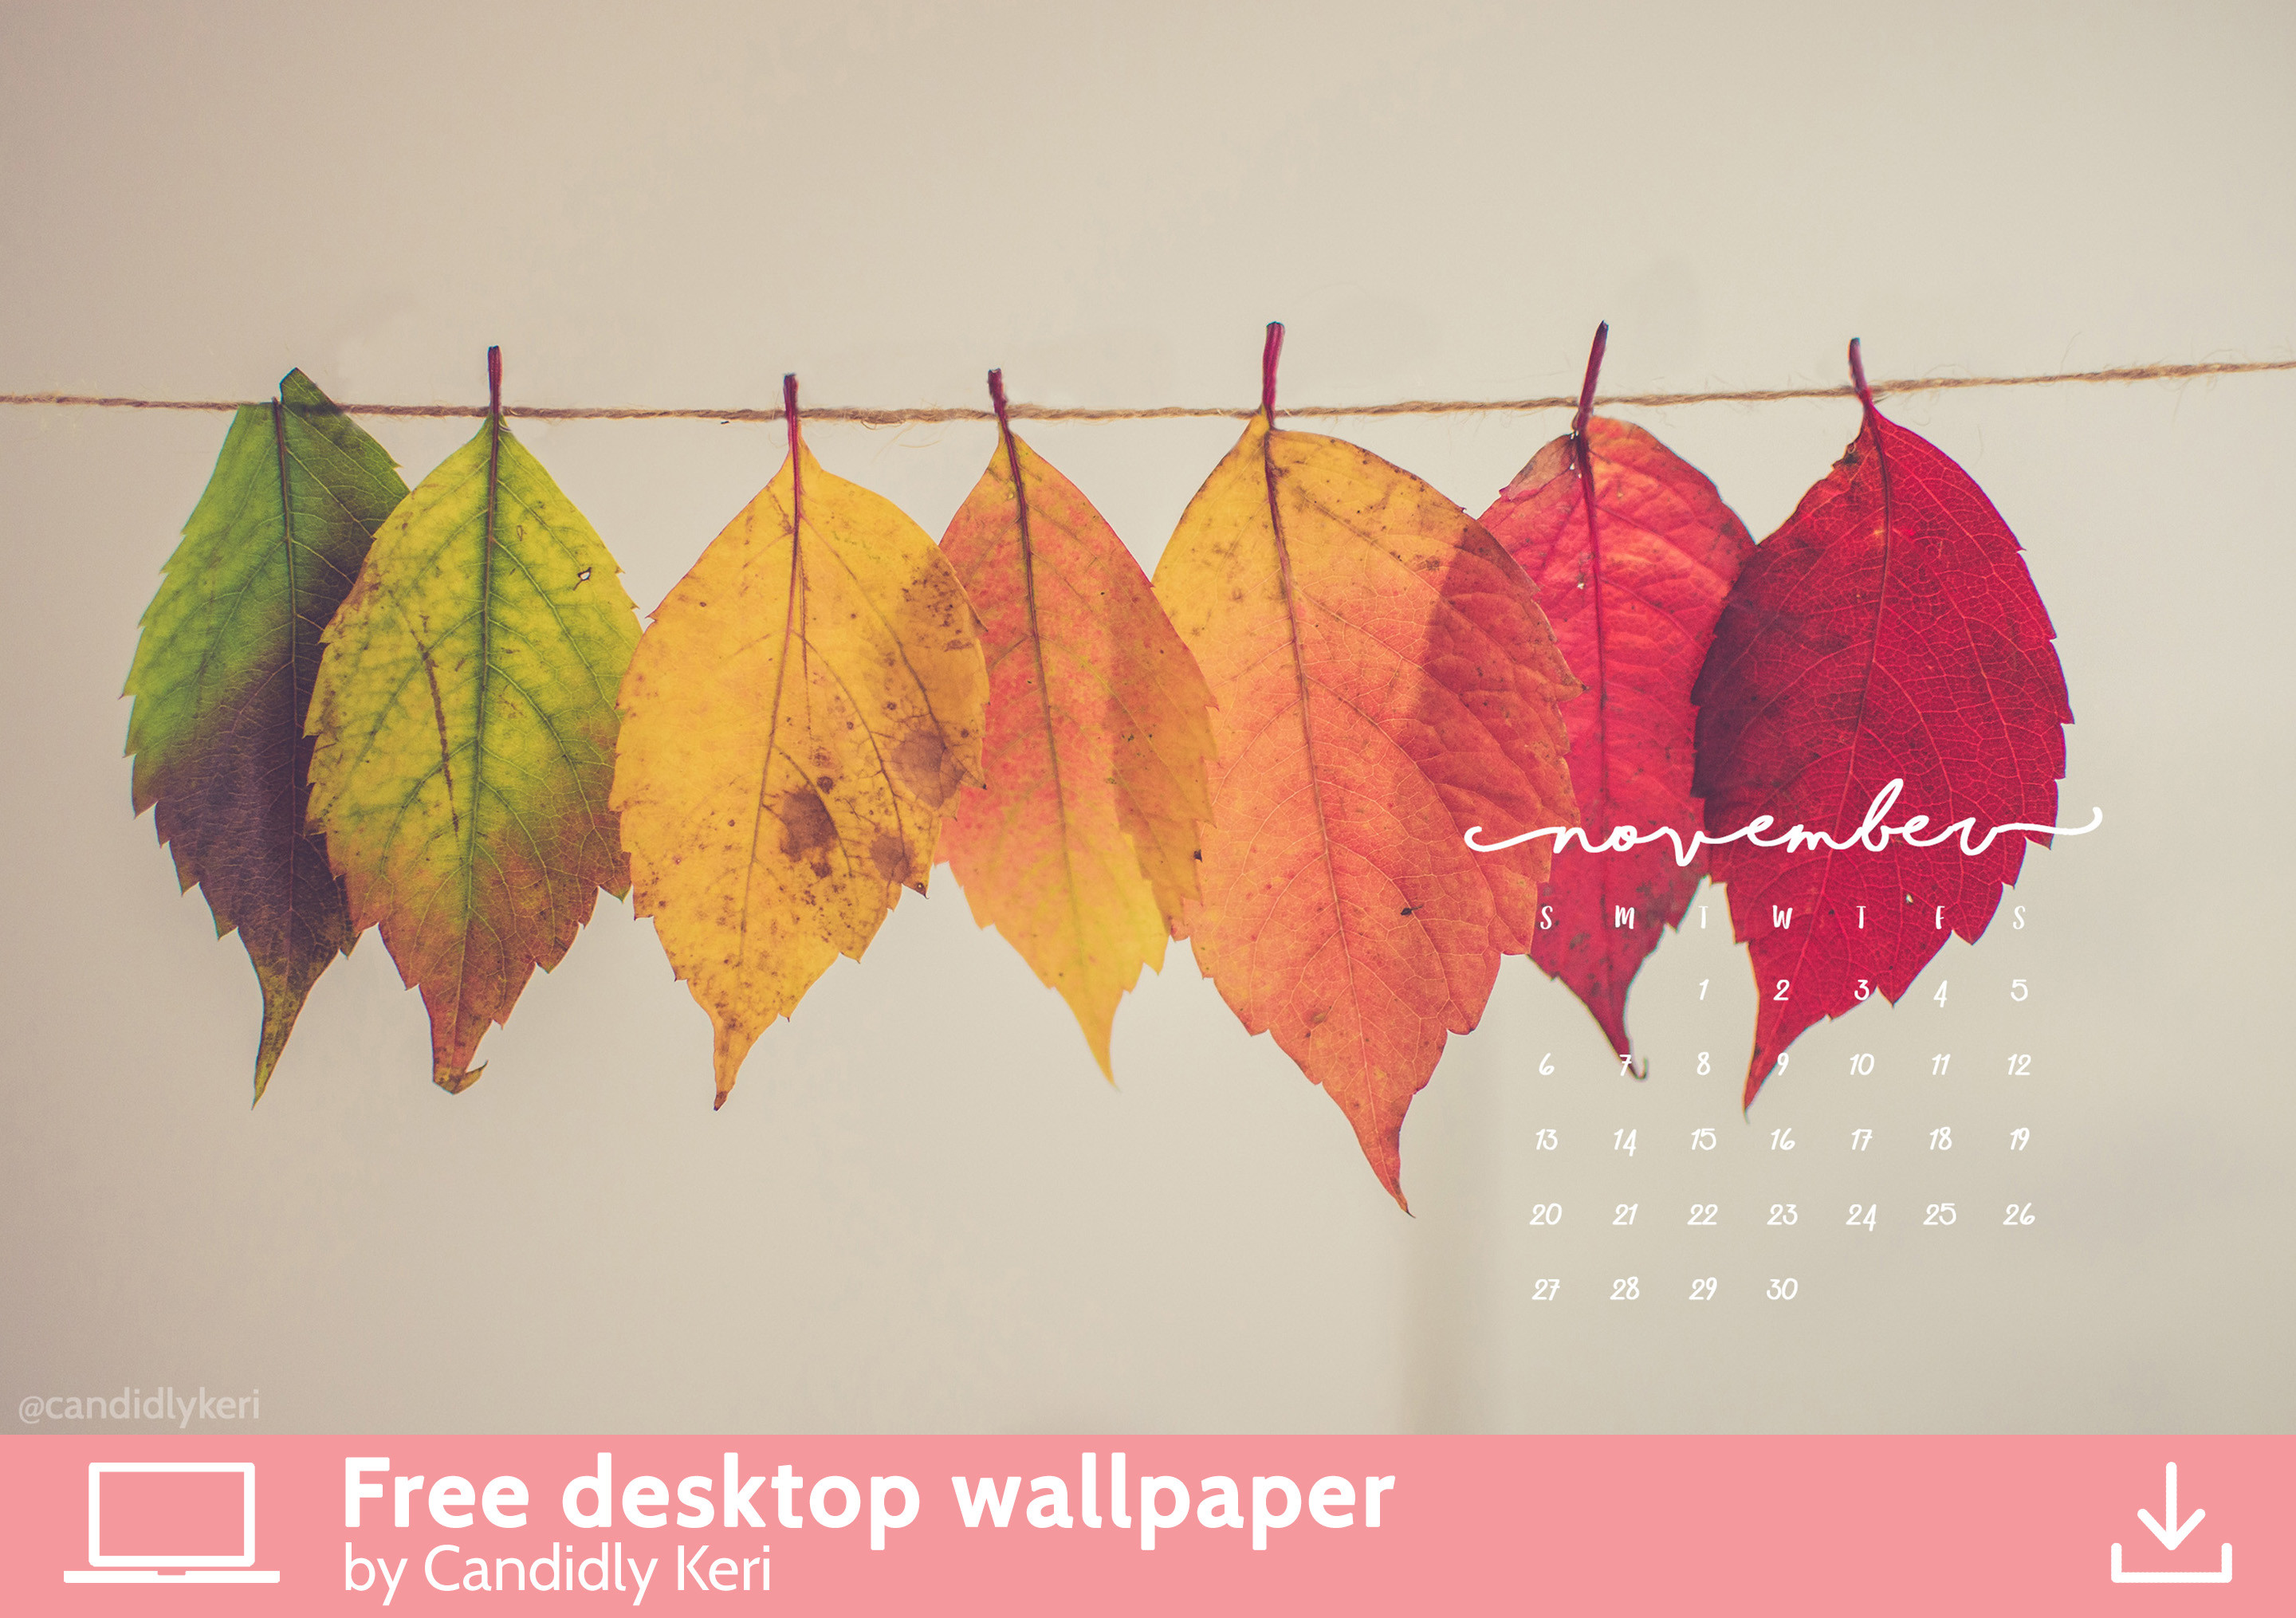 2880x2030 Pretty Leaf photography colorful leaves yellow orange red November calendar  2016 wallpaper you can download for